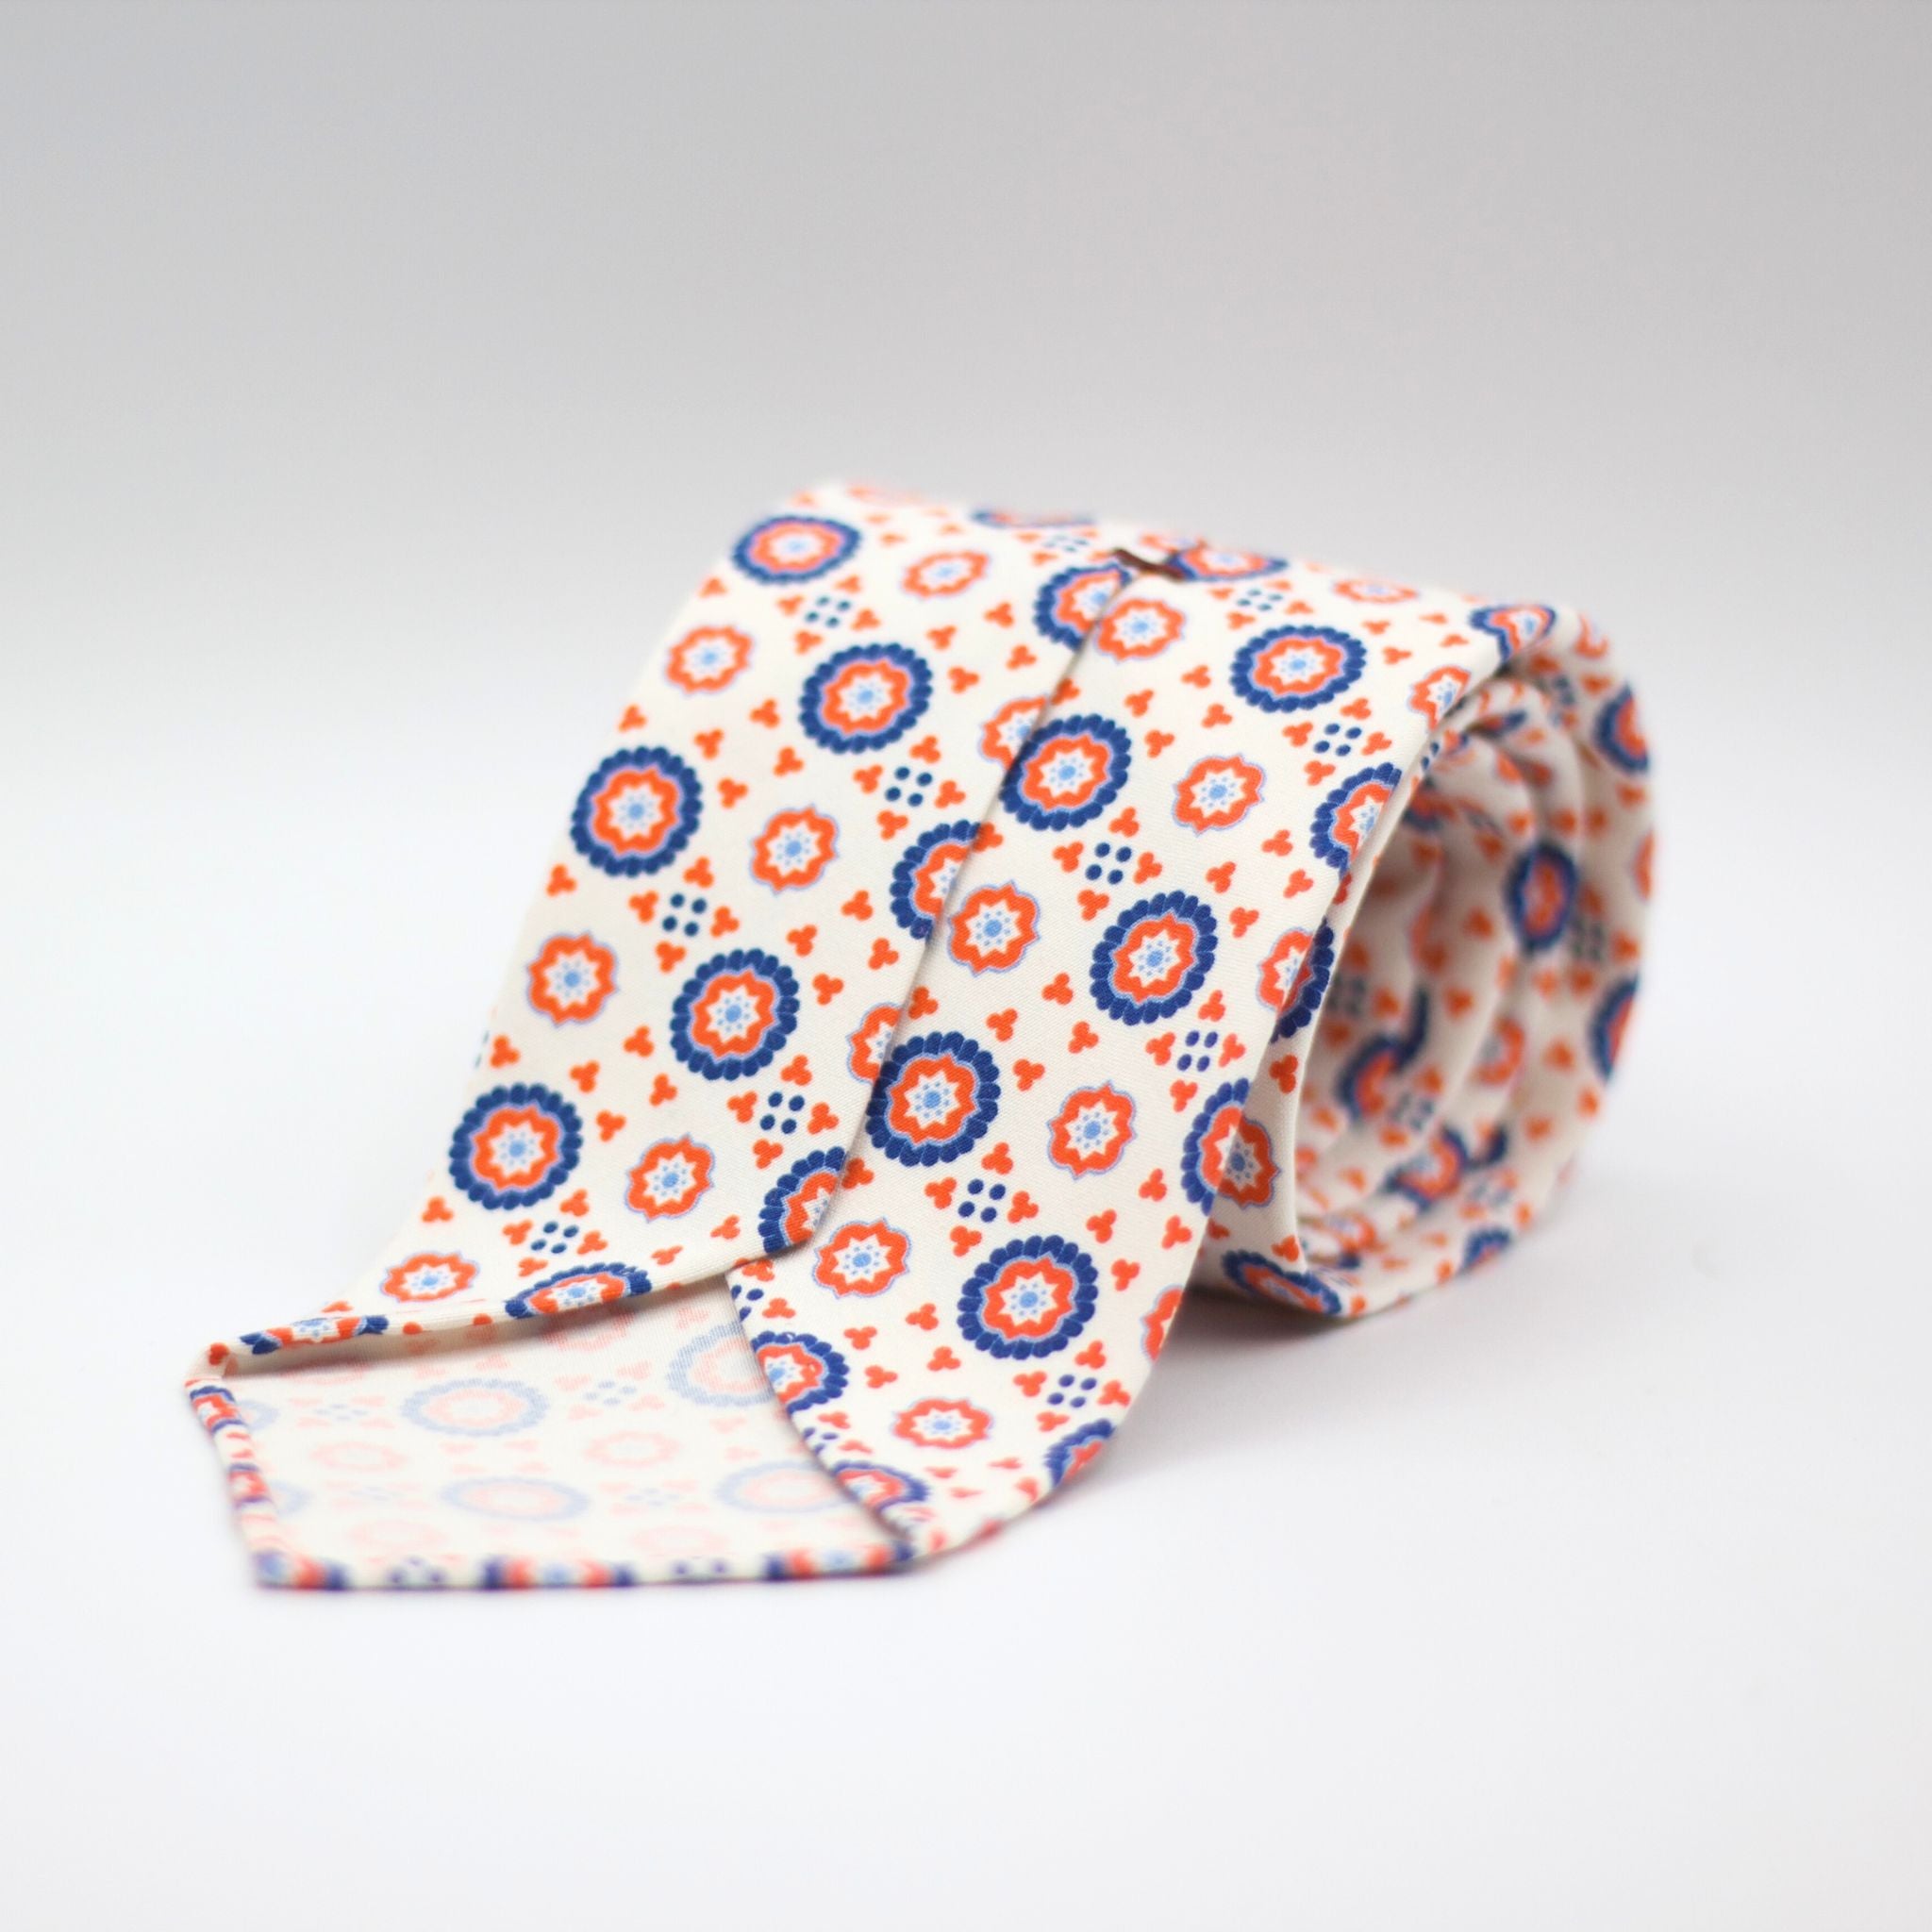 Cruciani & Bella - Printed Madder Silk  - Unlined - White, Red and Blue Tie